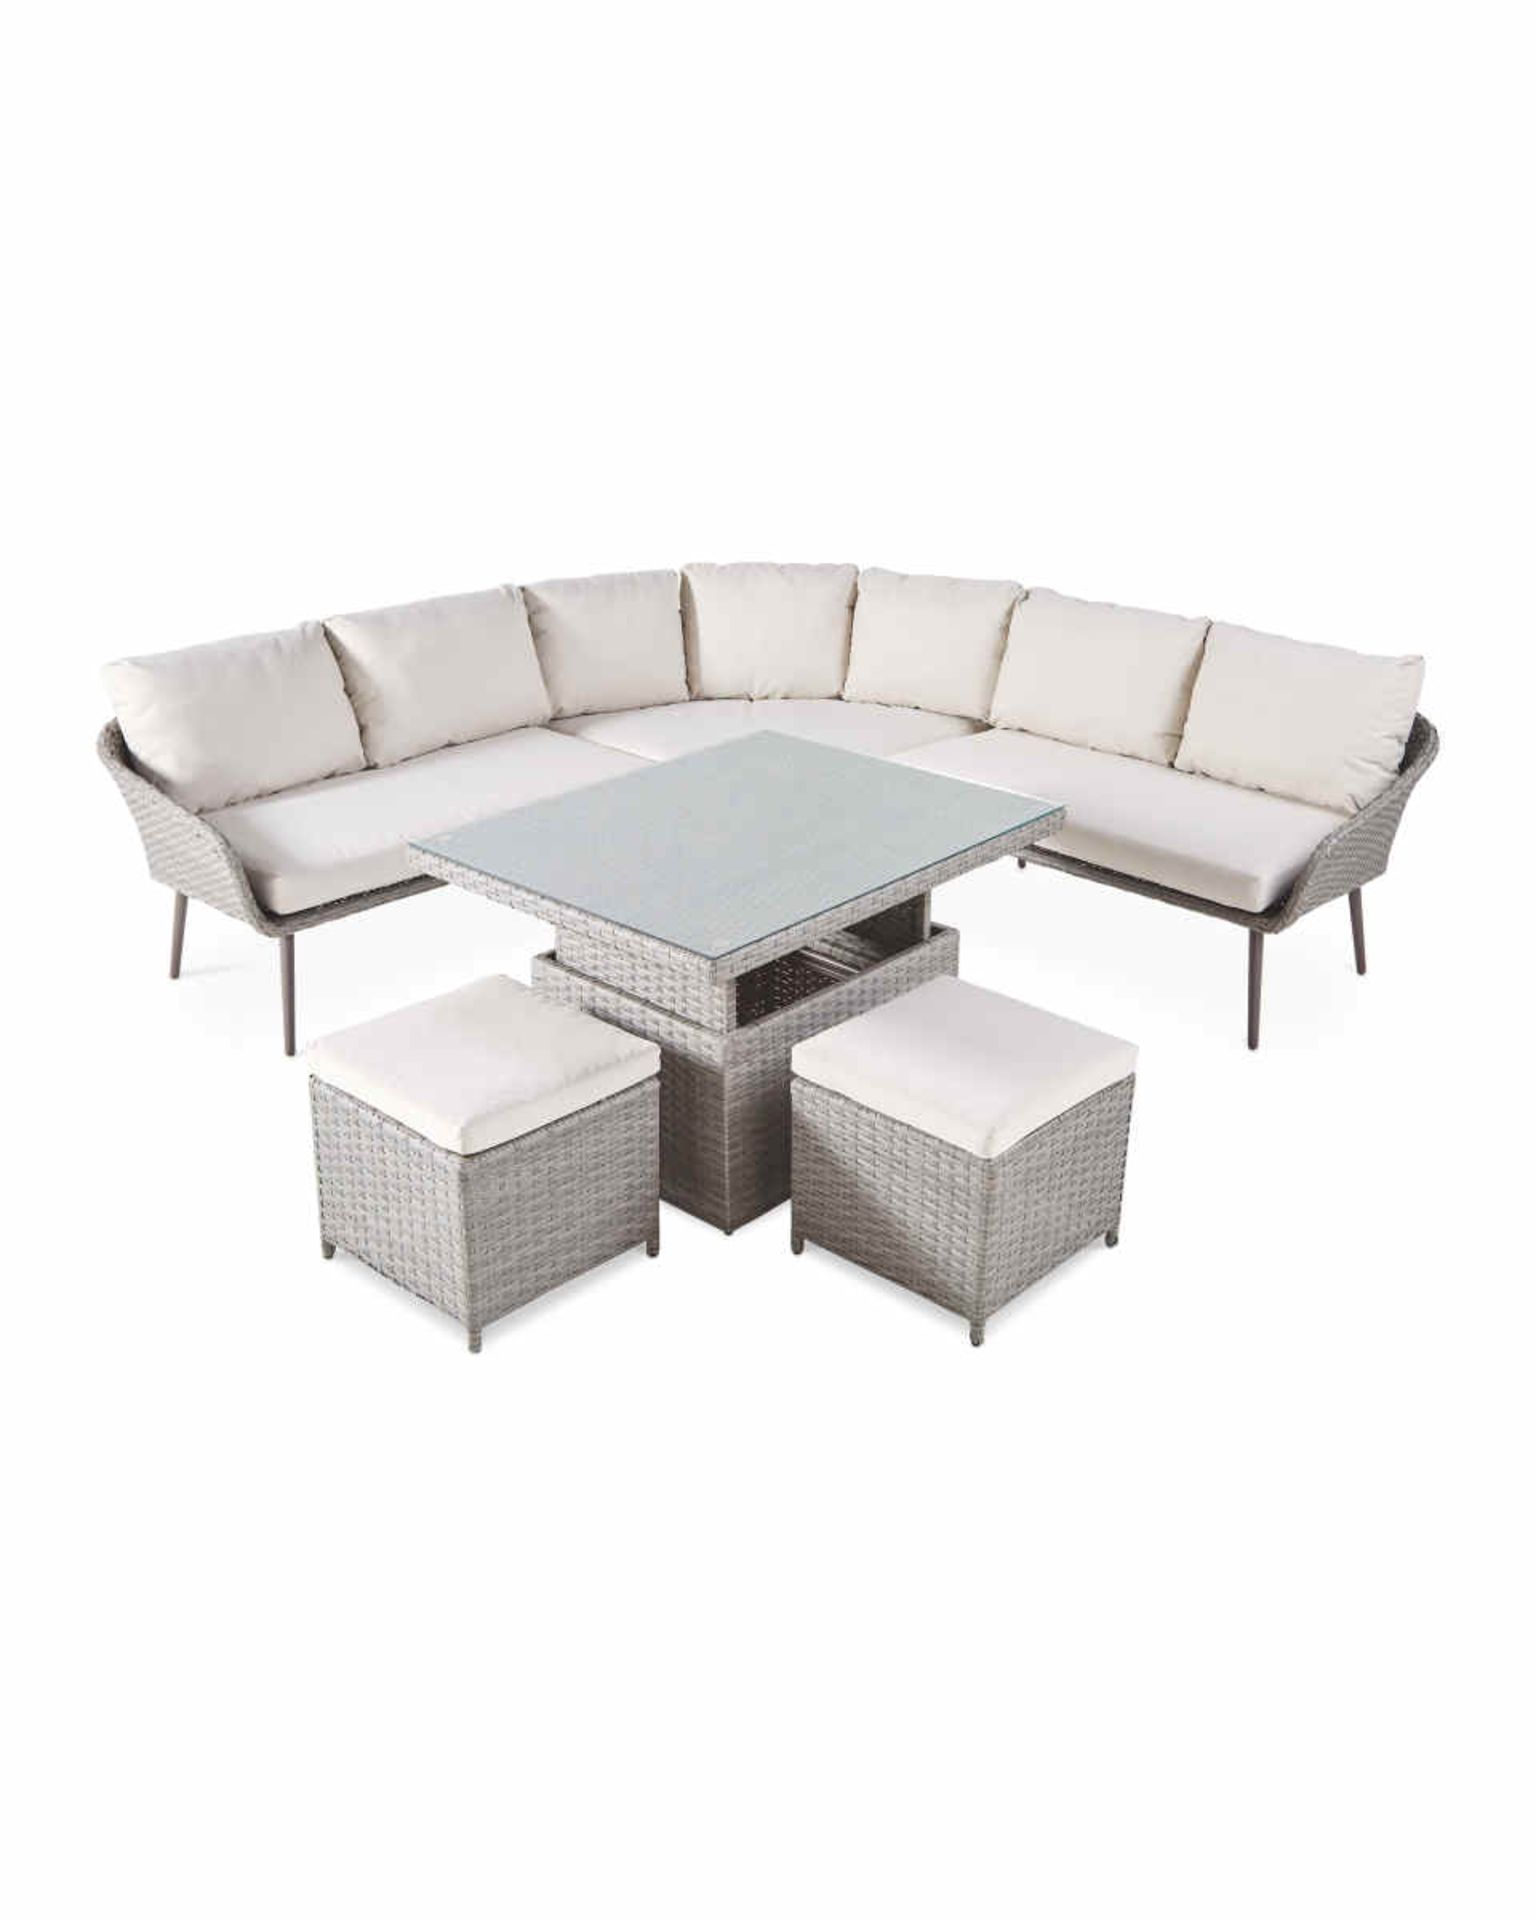 Multifunctional Lounge & Dining Corner Sofa Dining Set. Enjoy the warmer weather with this Luxury - Image 2 of 3